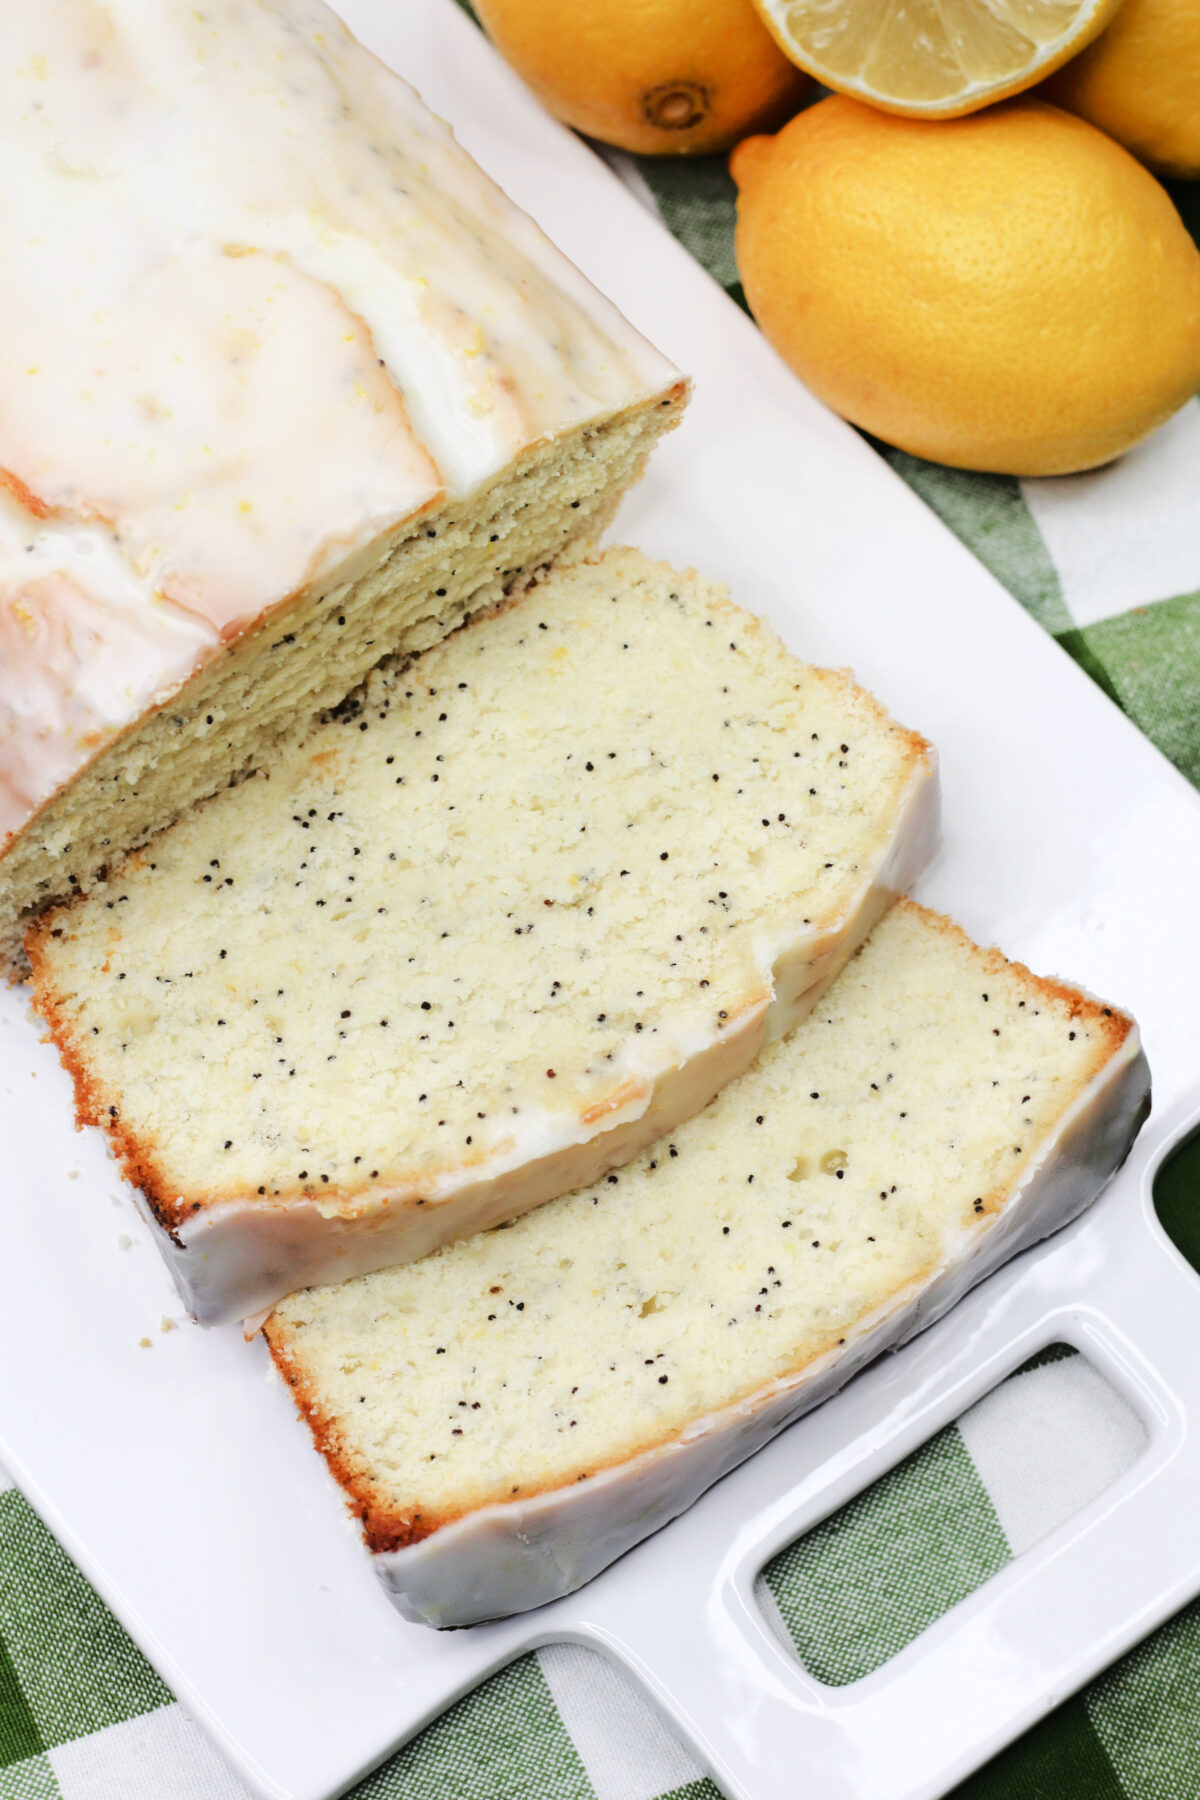 Learn how to make a delicious lemon poppy seed bread in this easy recipe. The key is using fresh lemons, and don't forget the poppy seeds!